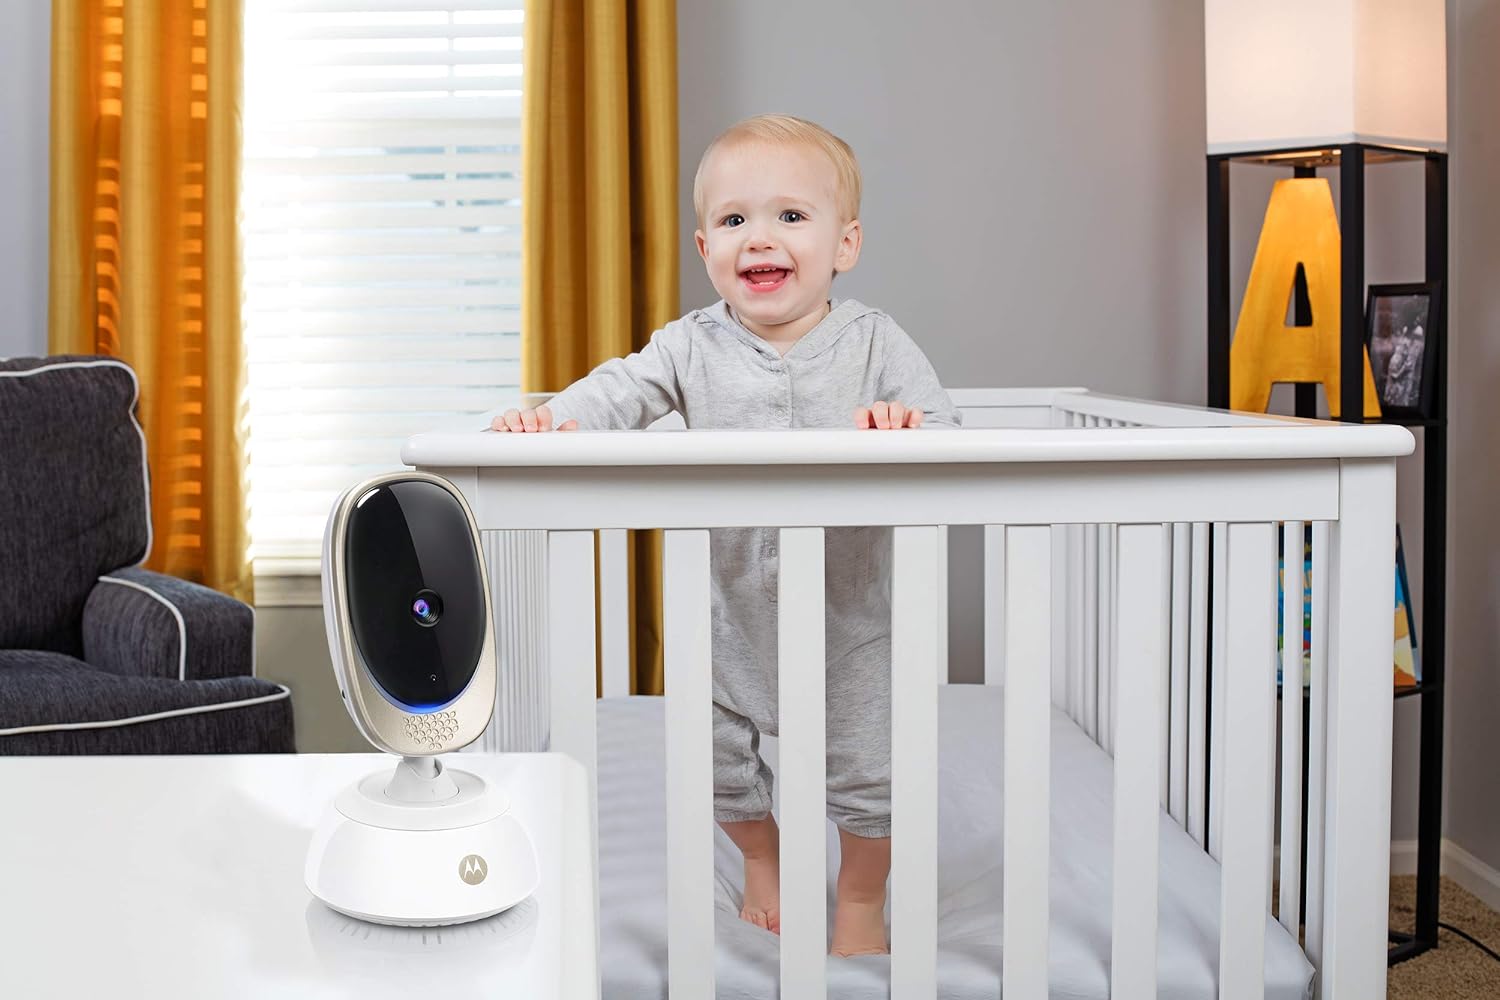 Motorola Baby Comfort C45 Video Baby Monitor with Pan and Zoom Function, Wi-Fi, 2.8 Inch / 7.1 cm Colour Display, Night Vision, Two-Way Audio and Temperature Sensor, White